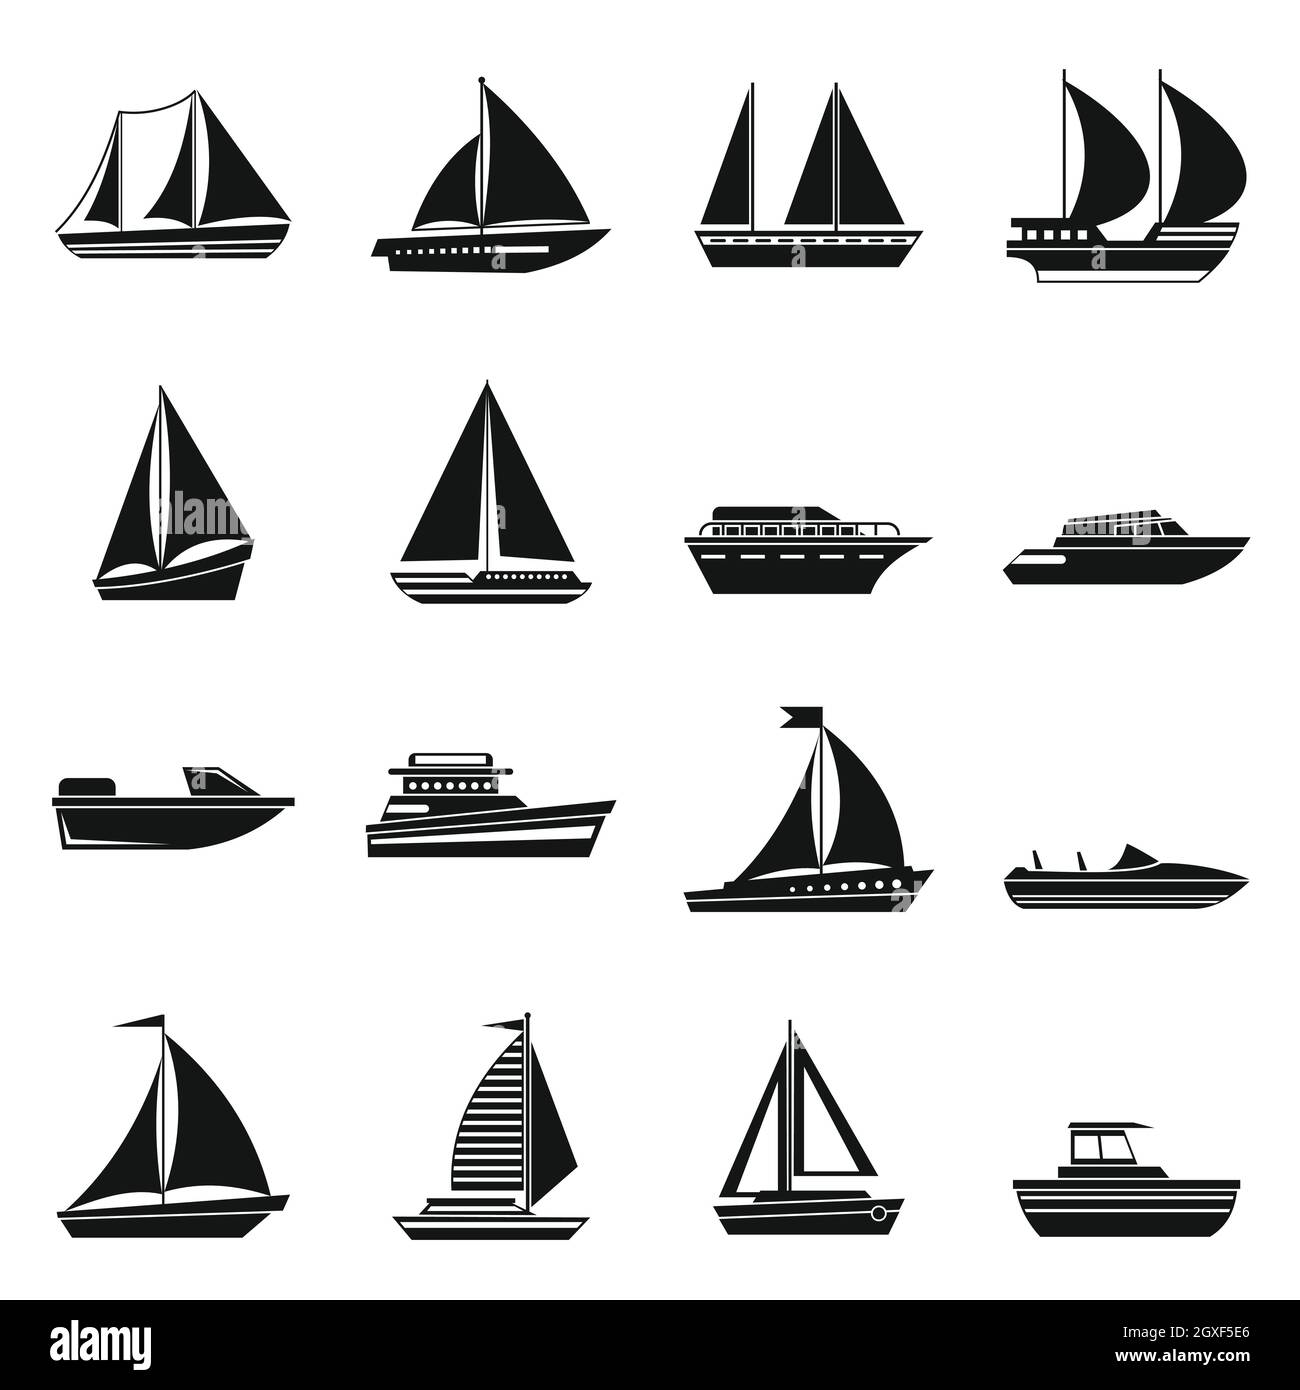 Boat and ship icons set in simple style for any design Stock Photo